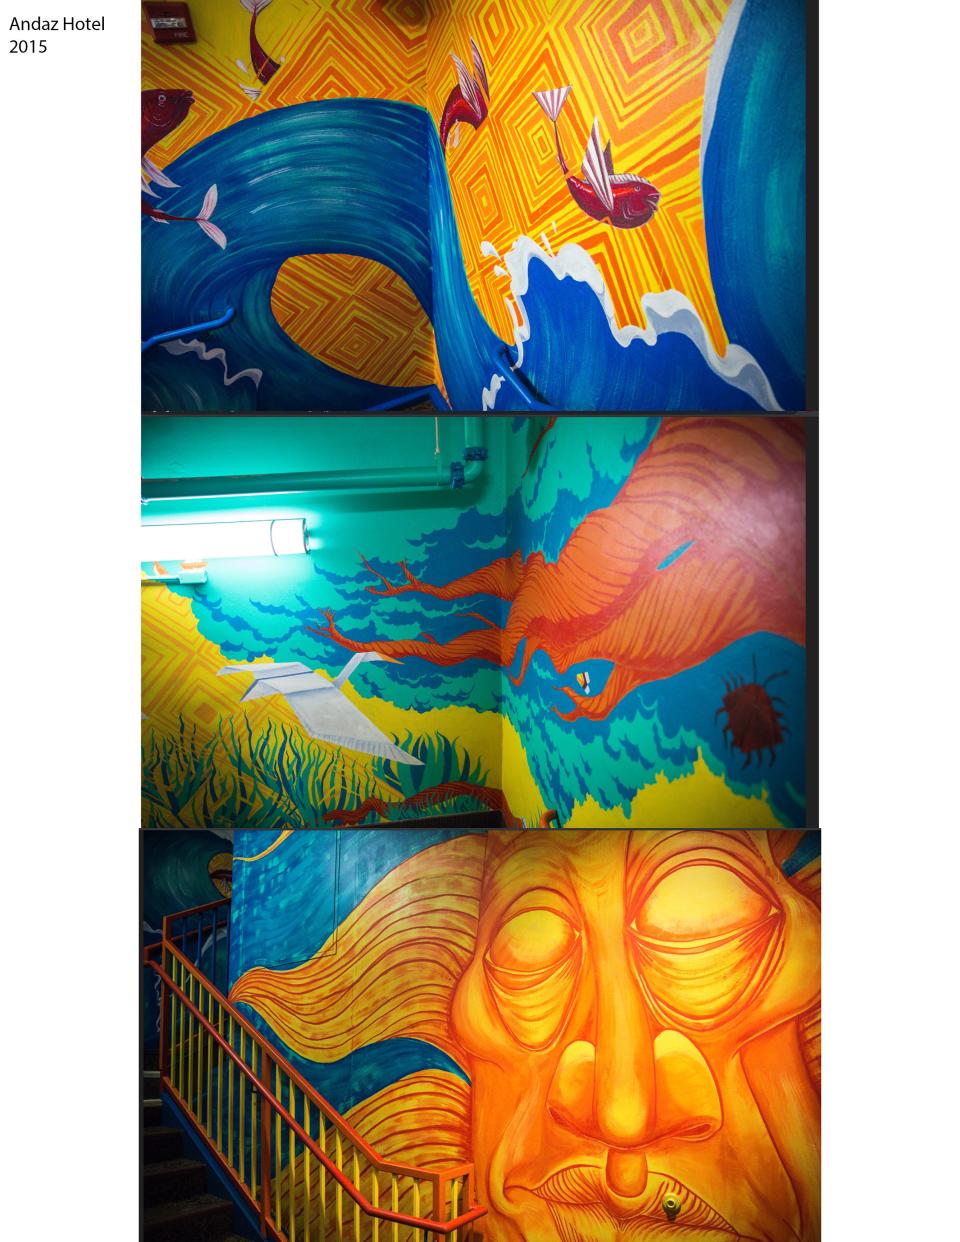 Mural for the Andaz Hotel